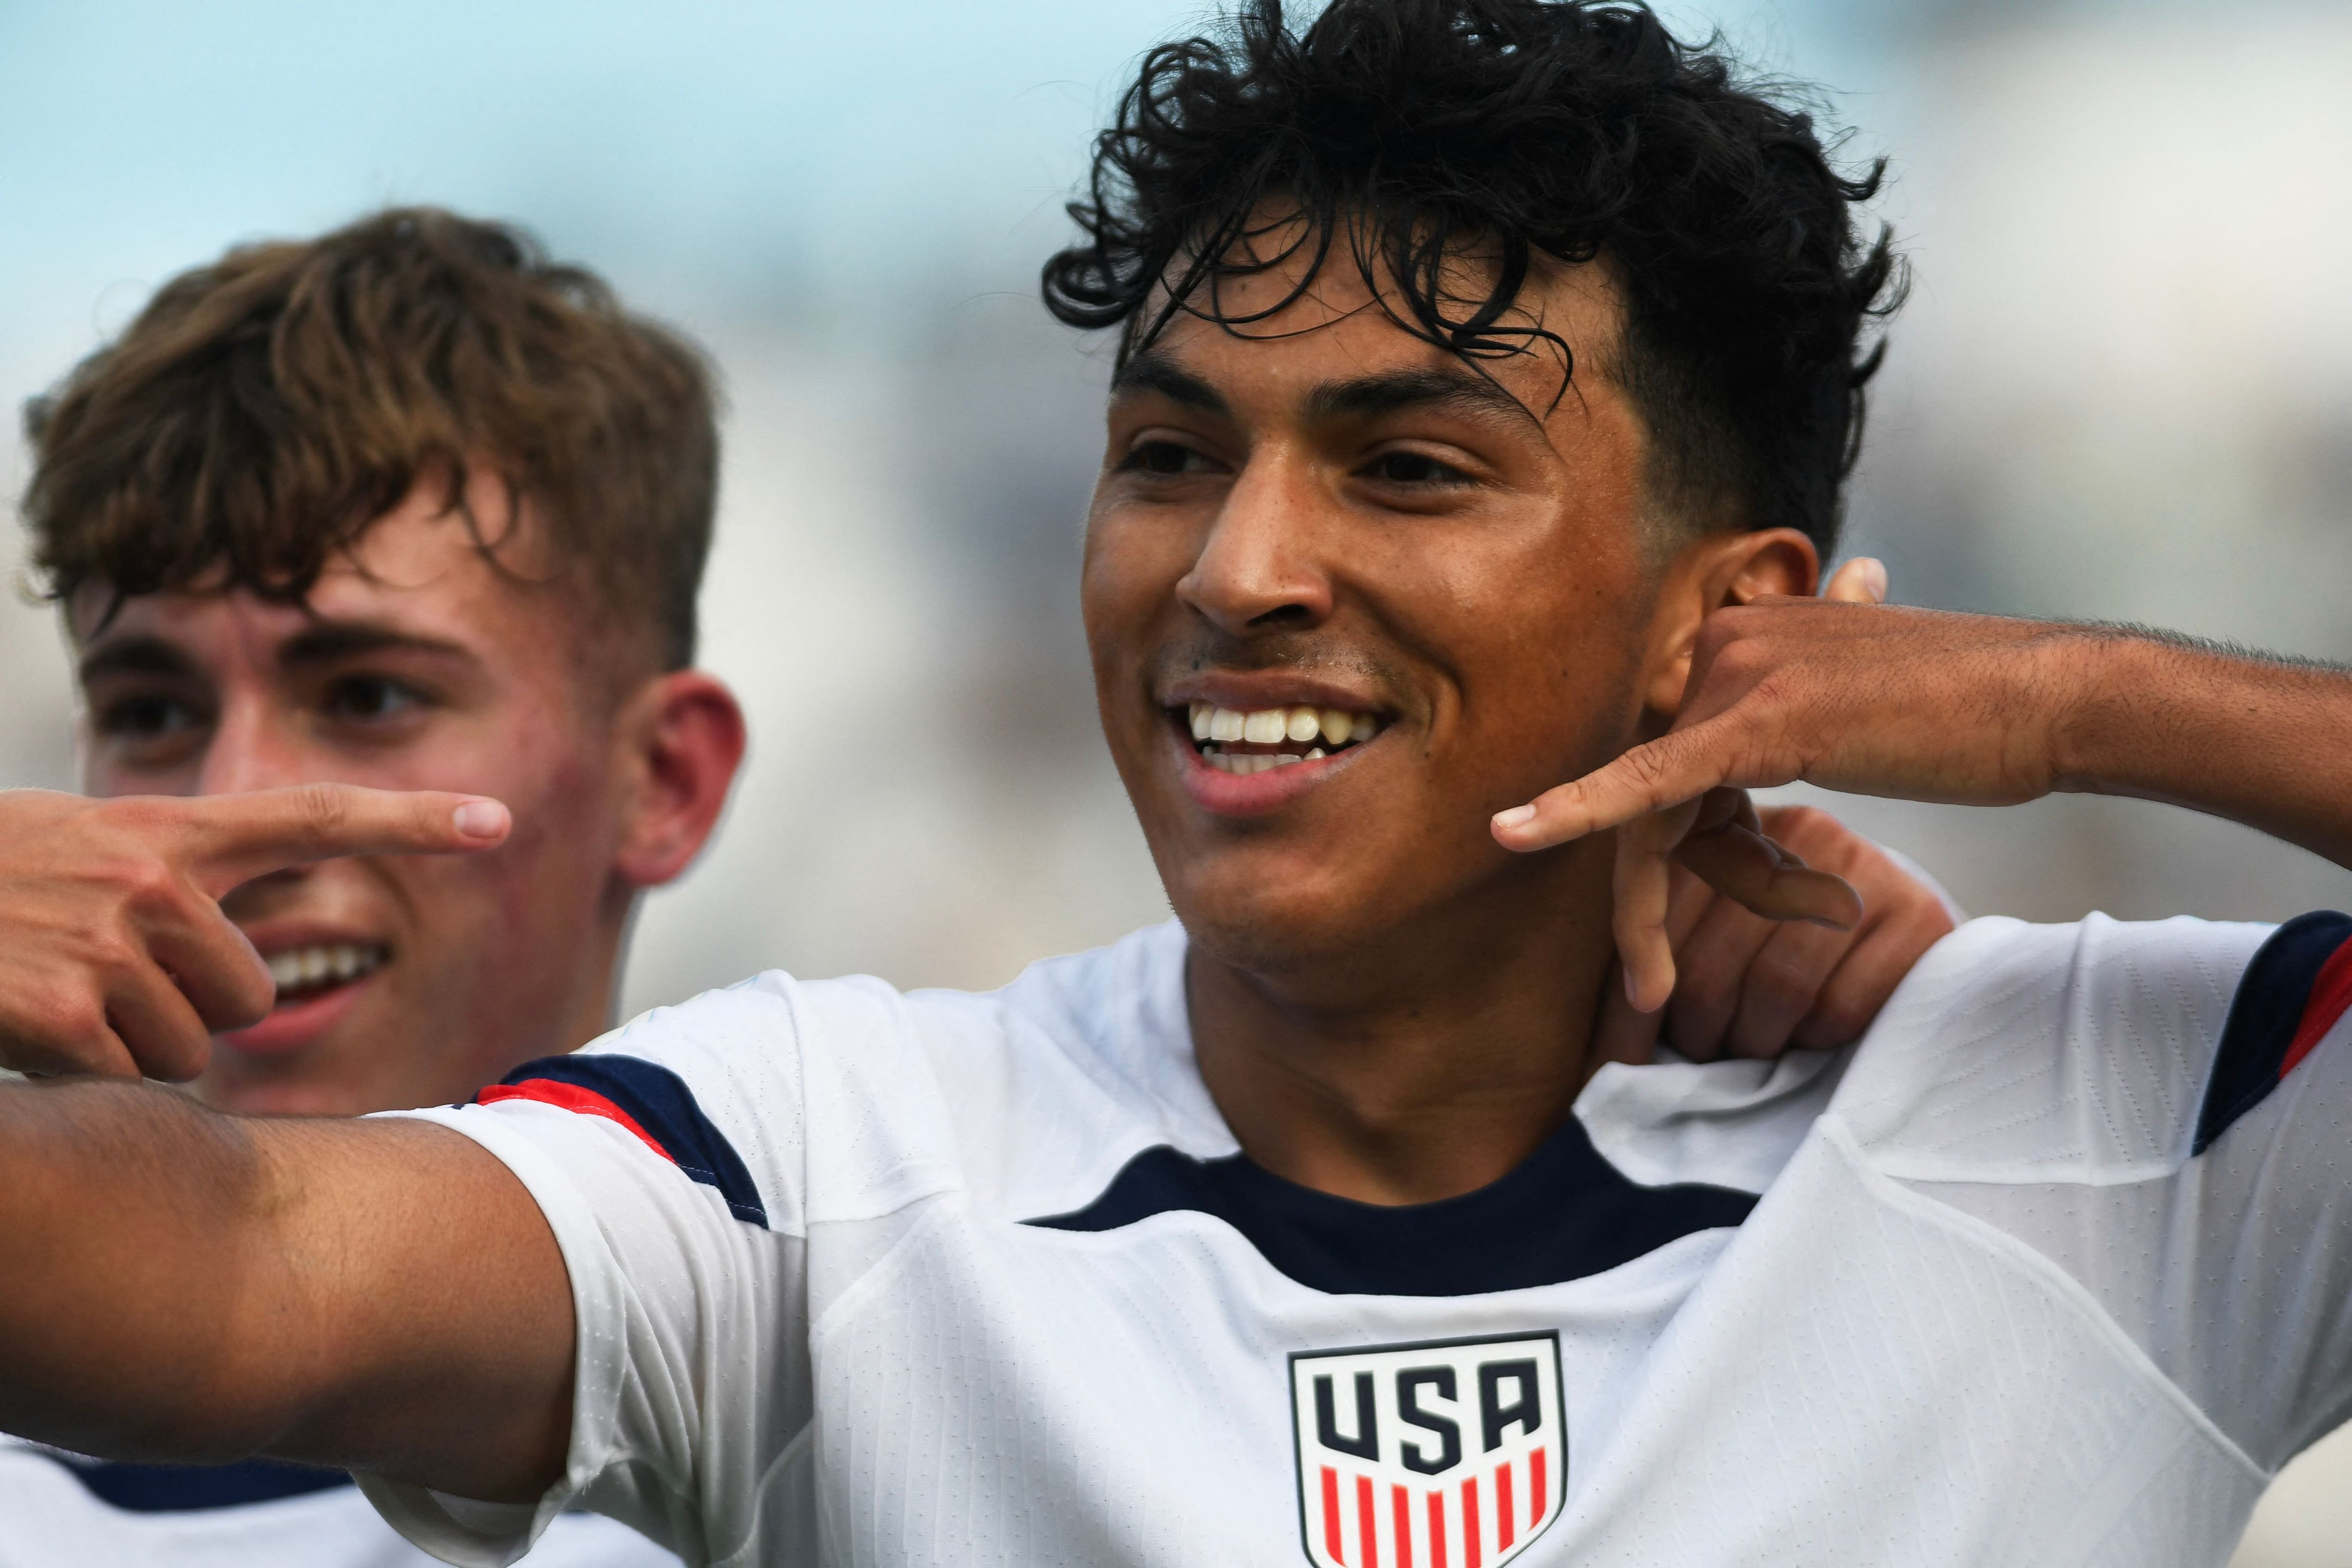 USA's midfielder Jonathan German Gomez (R) celebrates after scoring a goal during the Argentina 2023 U-20 World Cup Group B football match between USA and  Ecuador at the San Juan del Bicentenario stadium in San Juan, Argentina on May 20, 2023. (Photo by Andres Larrovere / AFP)